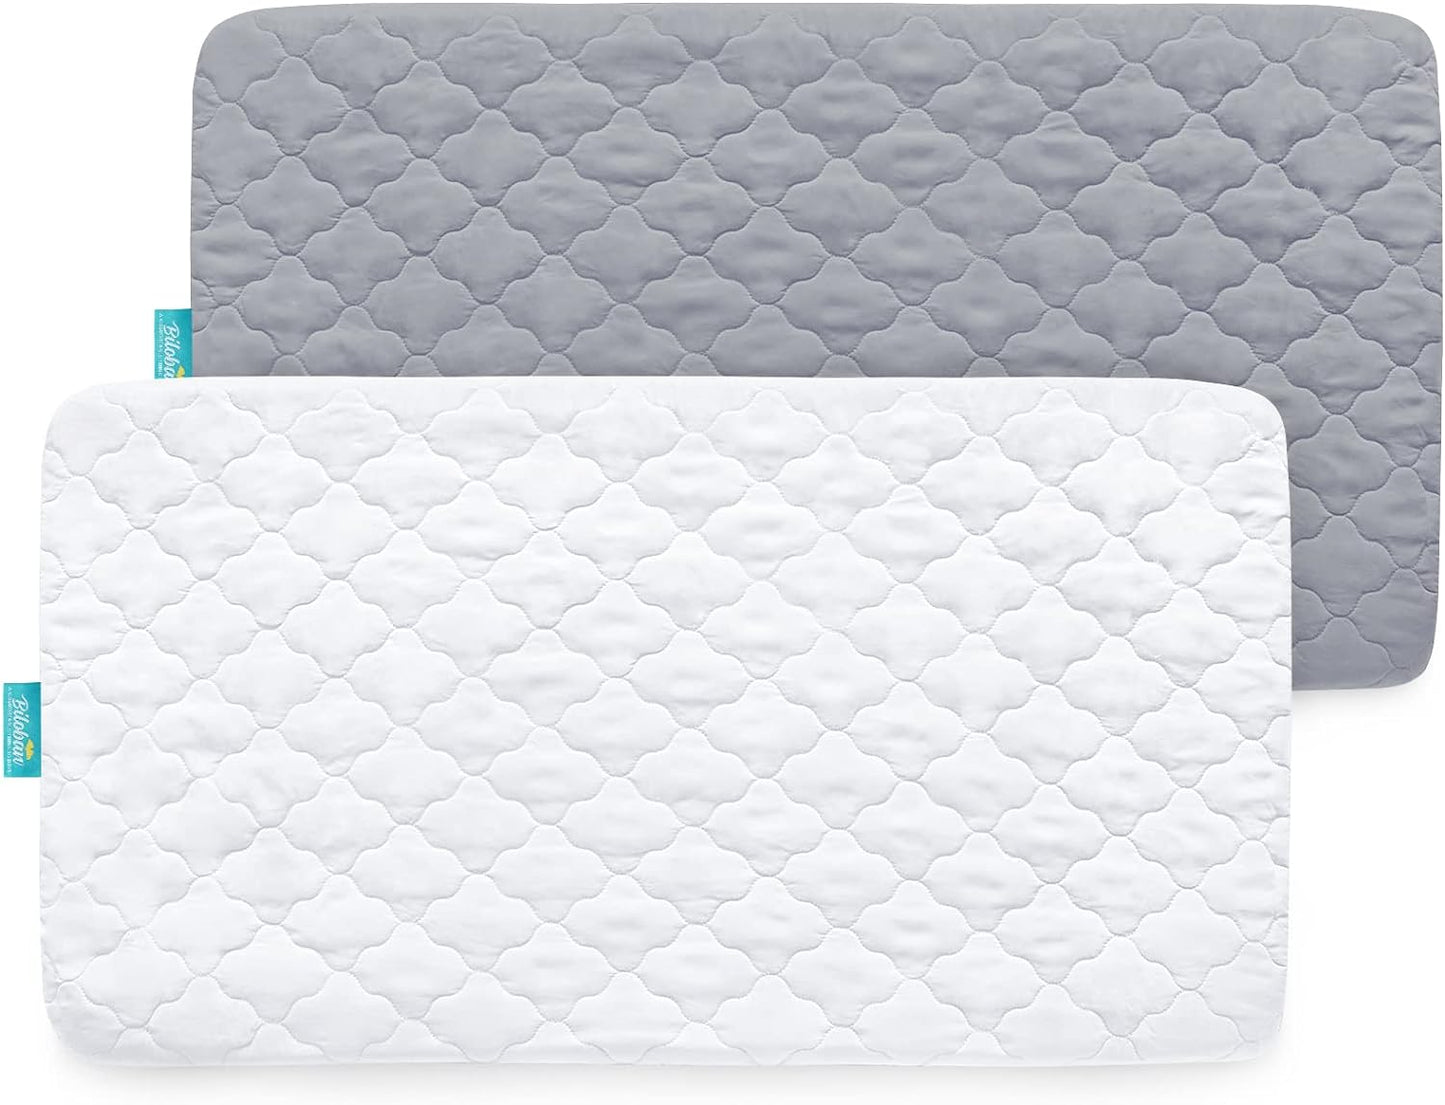 Crib Mattress Protector/ Pad Cover - 2 Pack, Ultra Soft Microfiber, Waterproof (for Standard Crib/ Toddler Bed)